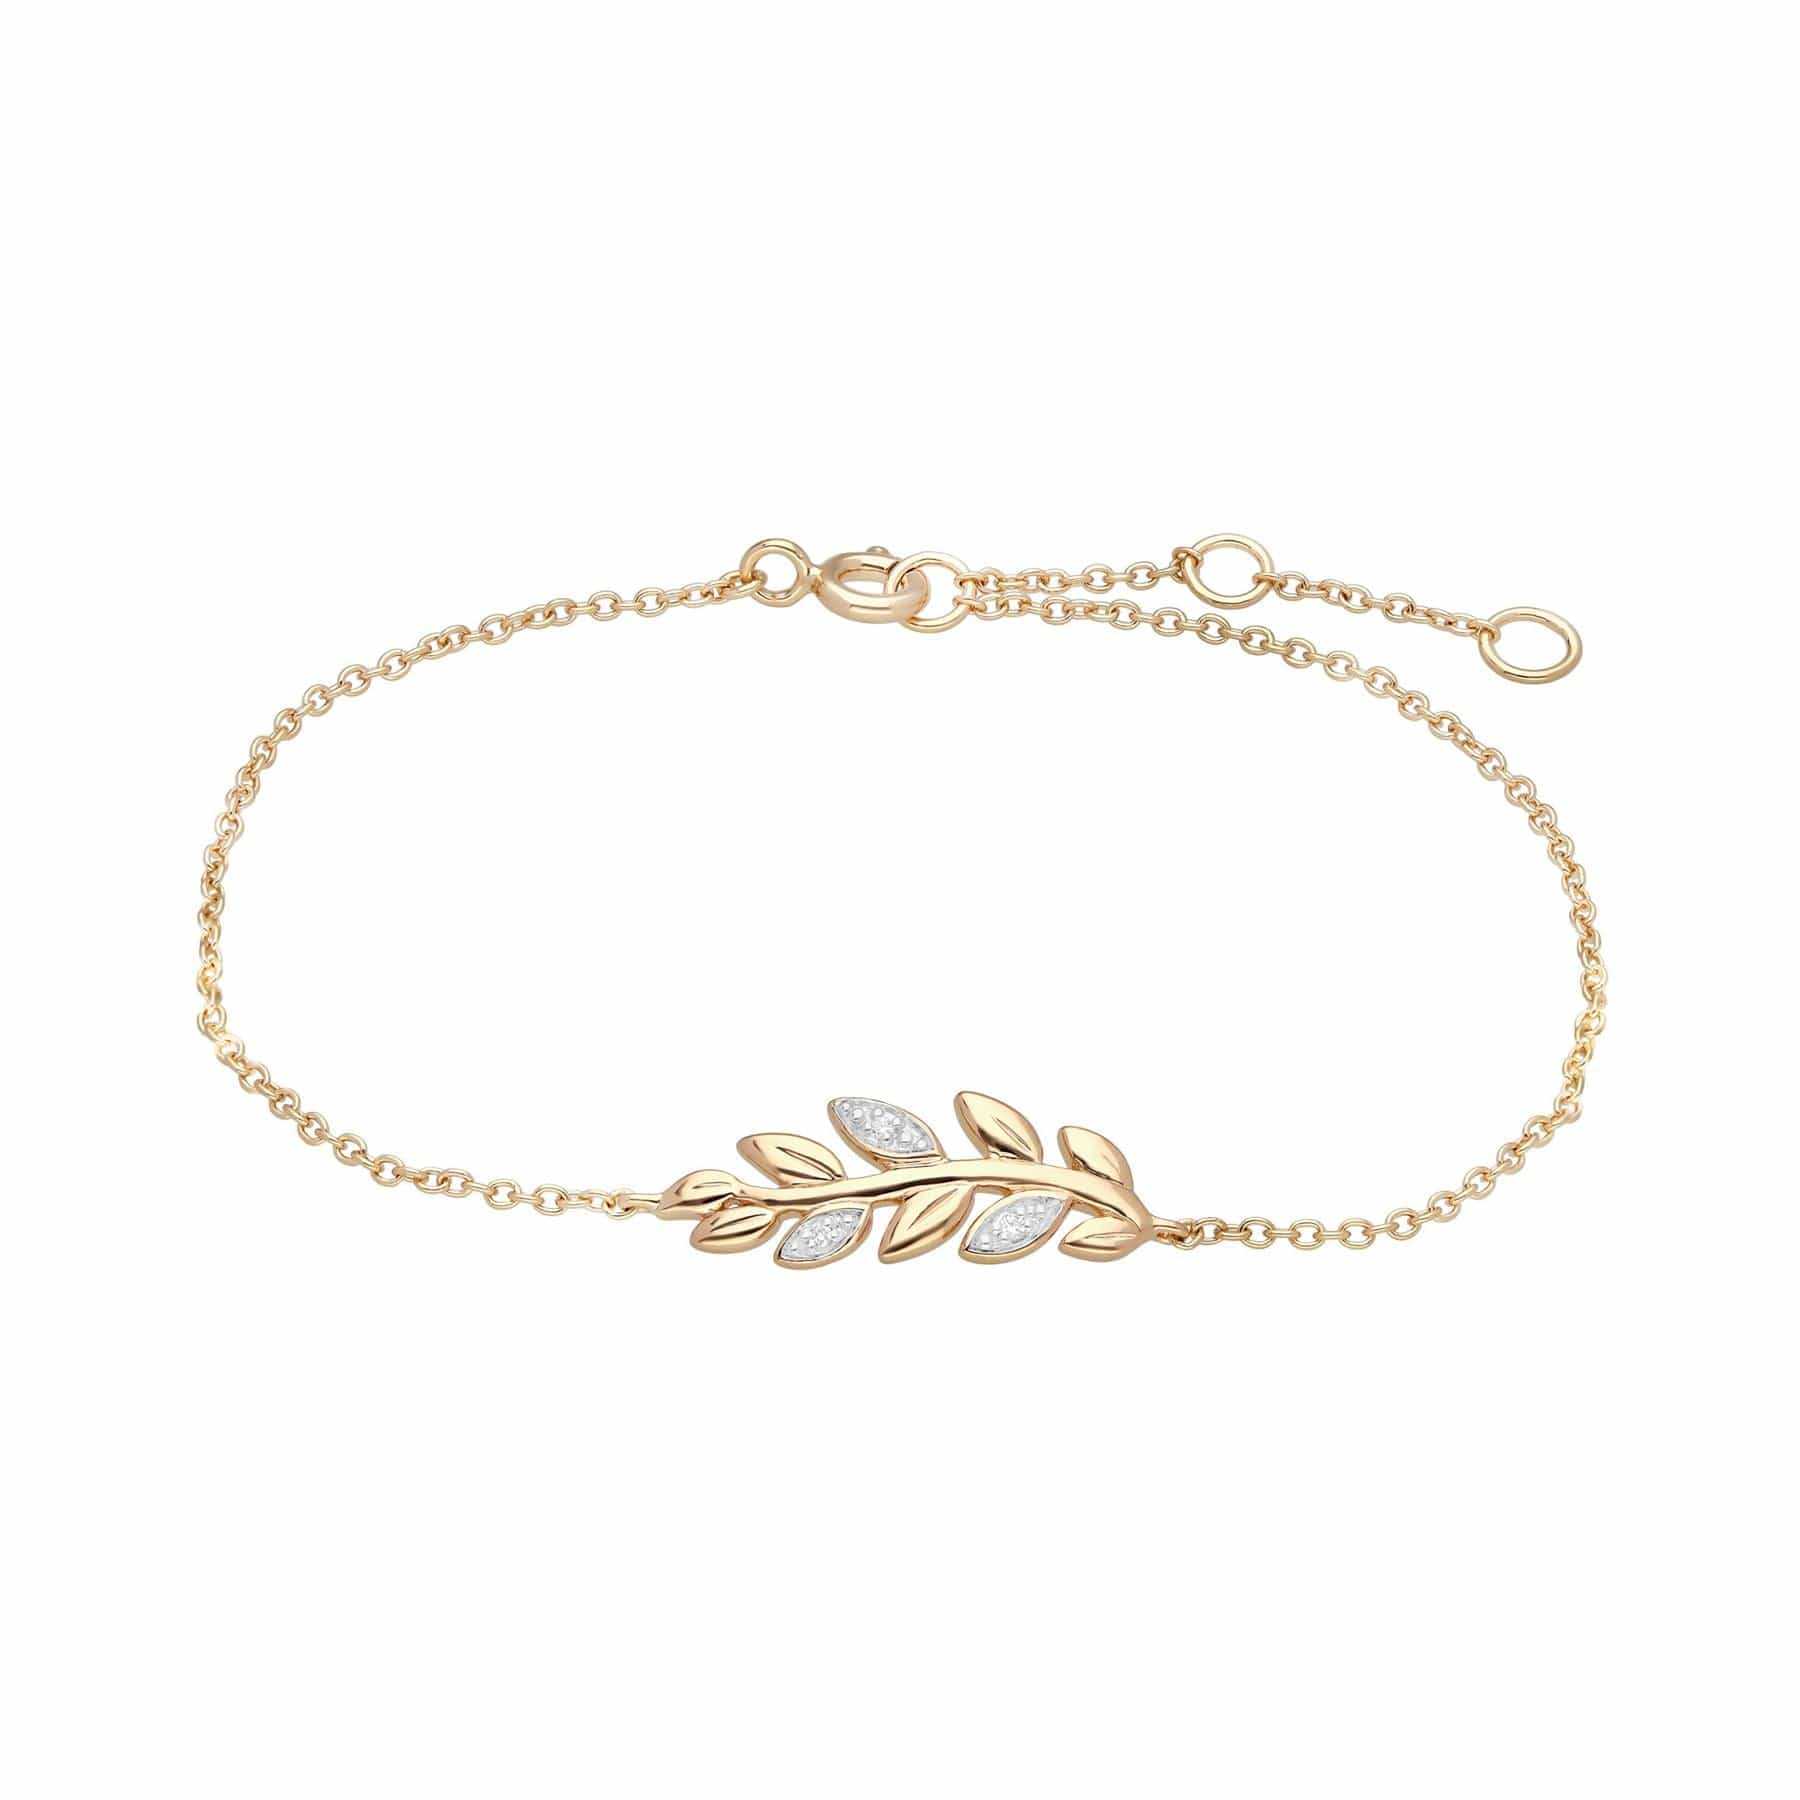 191L0158019 O Leaf Diamond Pave Chain Bracelet in 9ct Yellow Gold 1